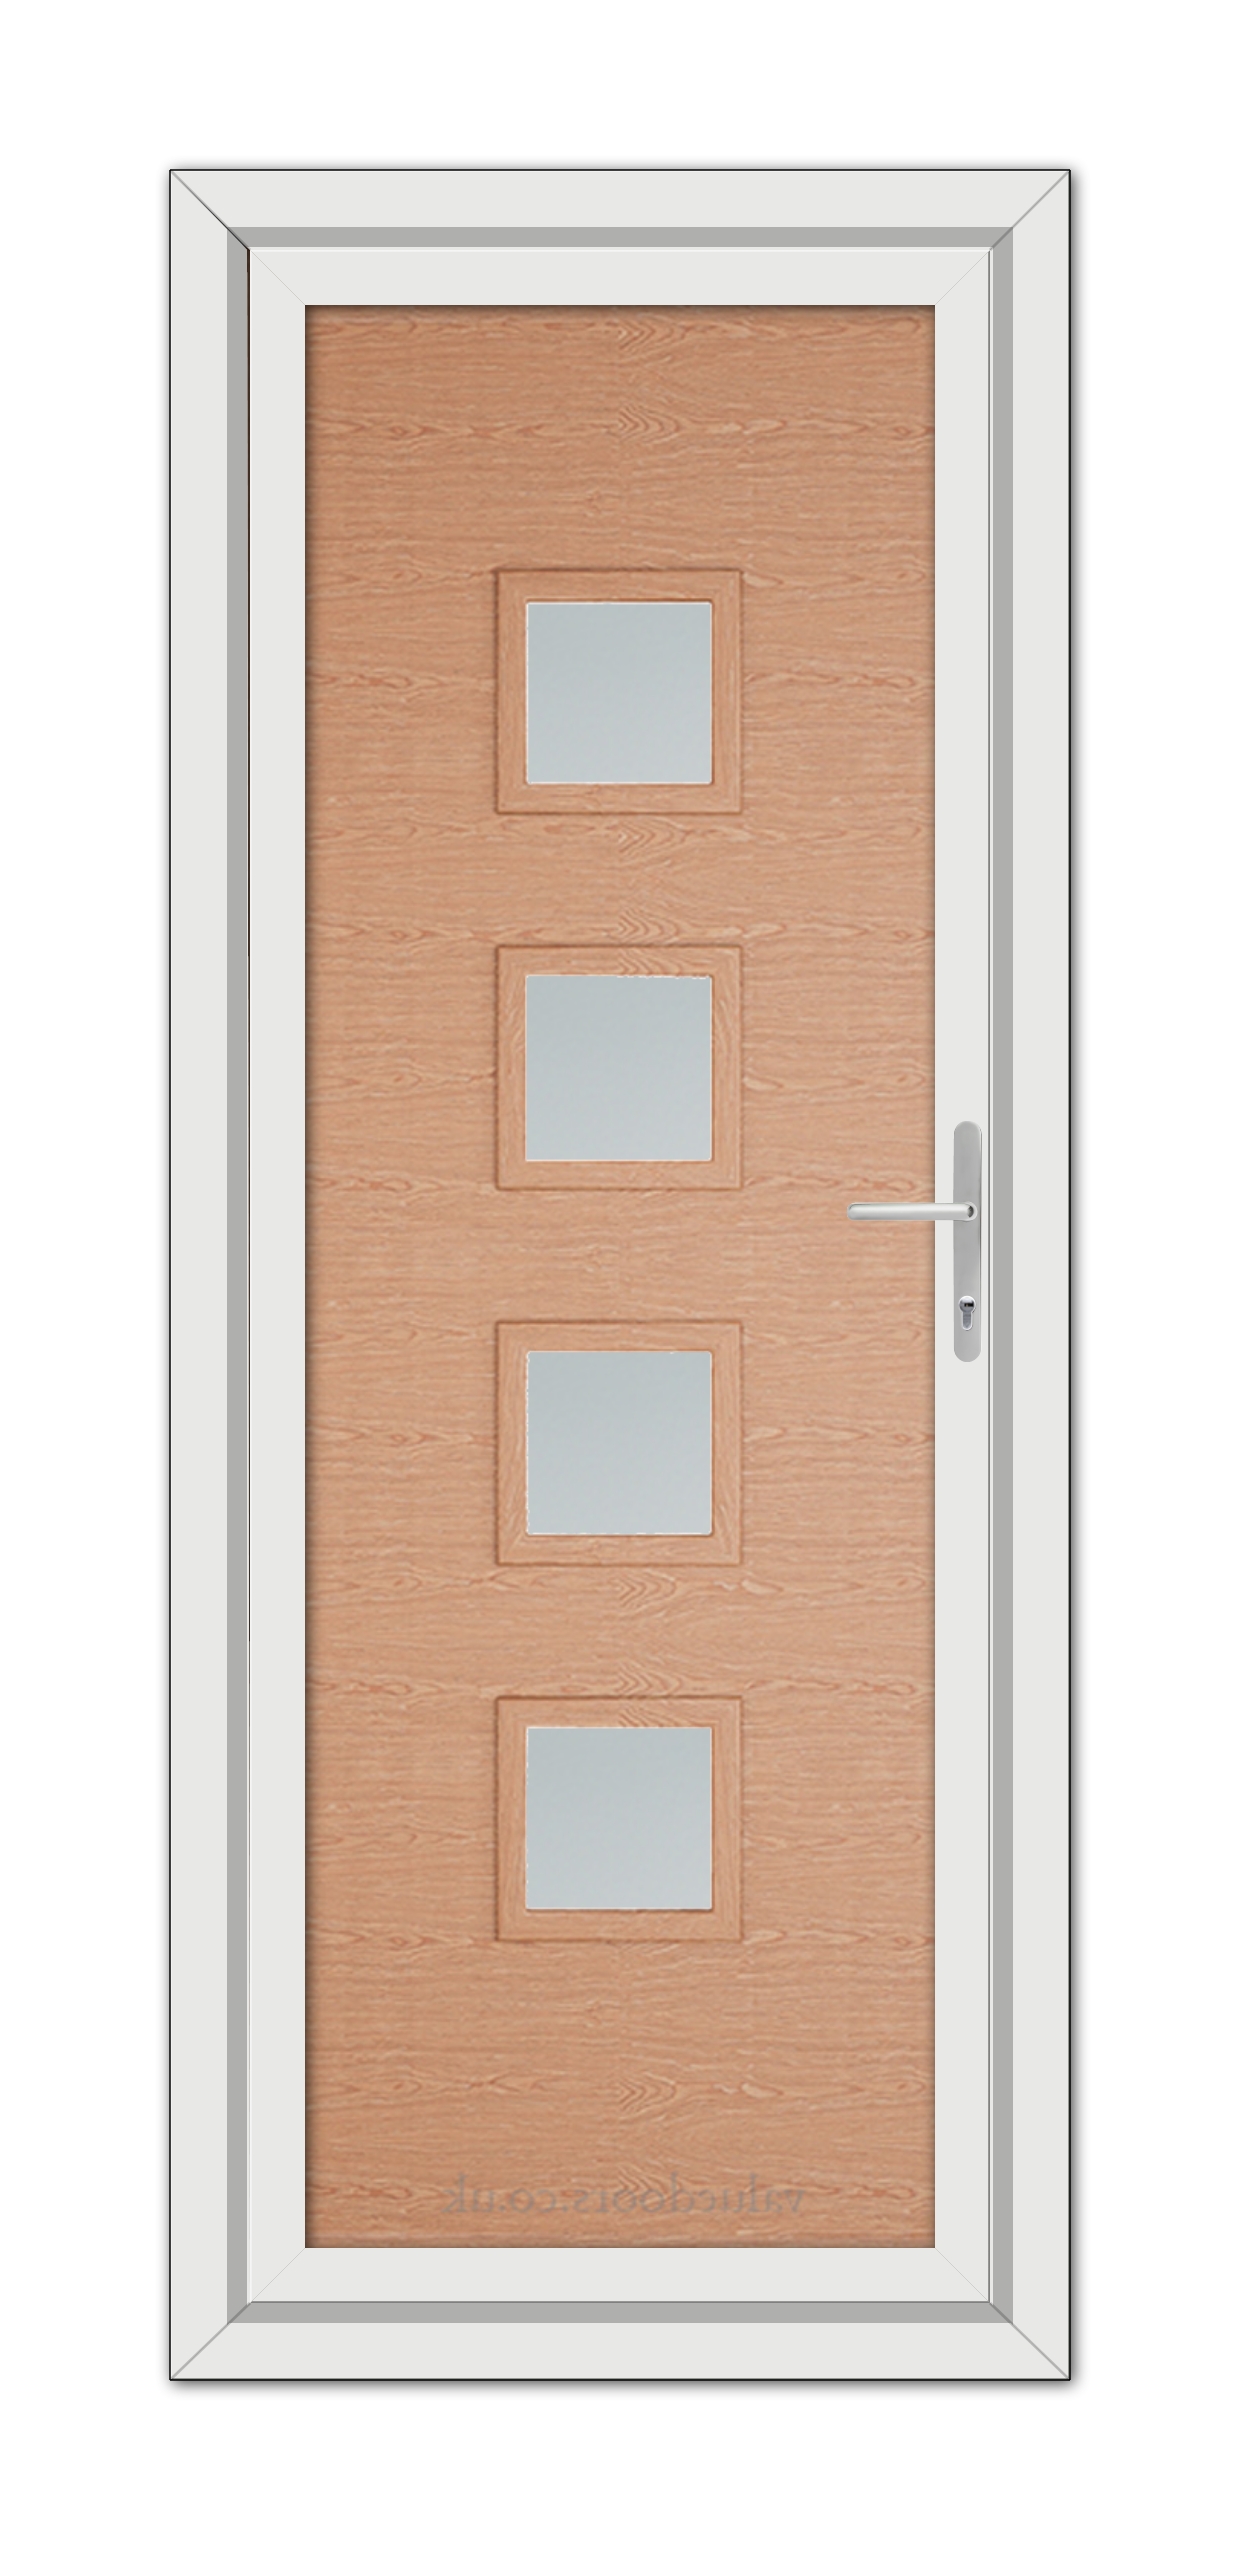 A Irish Oak Modern 5034 uPVC door with four square glass panels and a metallic handle, framed in white.